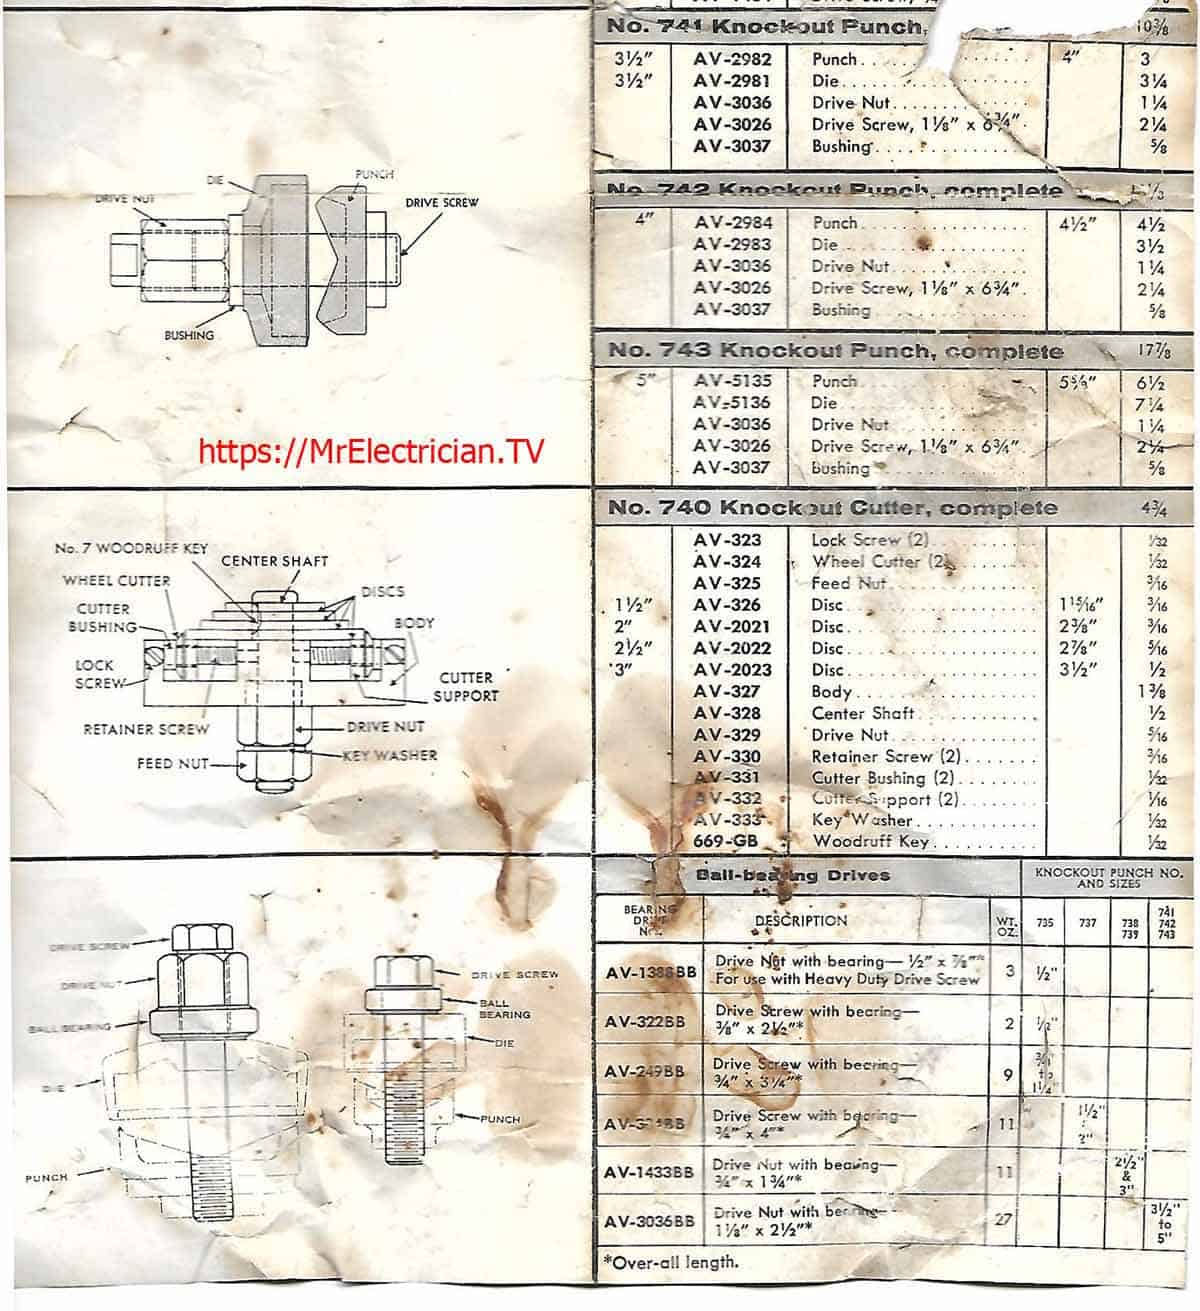 A section of a very old (Maybe 1960s) Greenlee Hand Knockout Punch operating instructions. Depicted here are the dimensions of the knockout punch parts and their Greenlee part numbers.